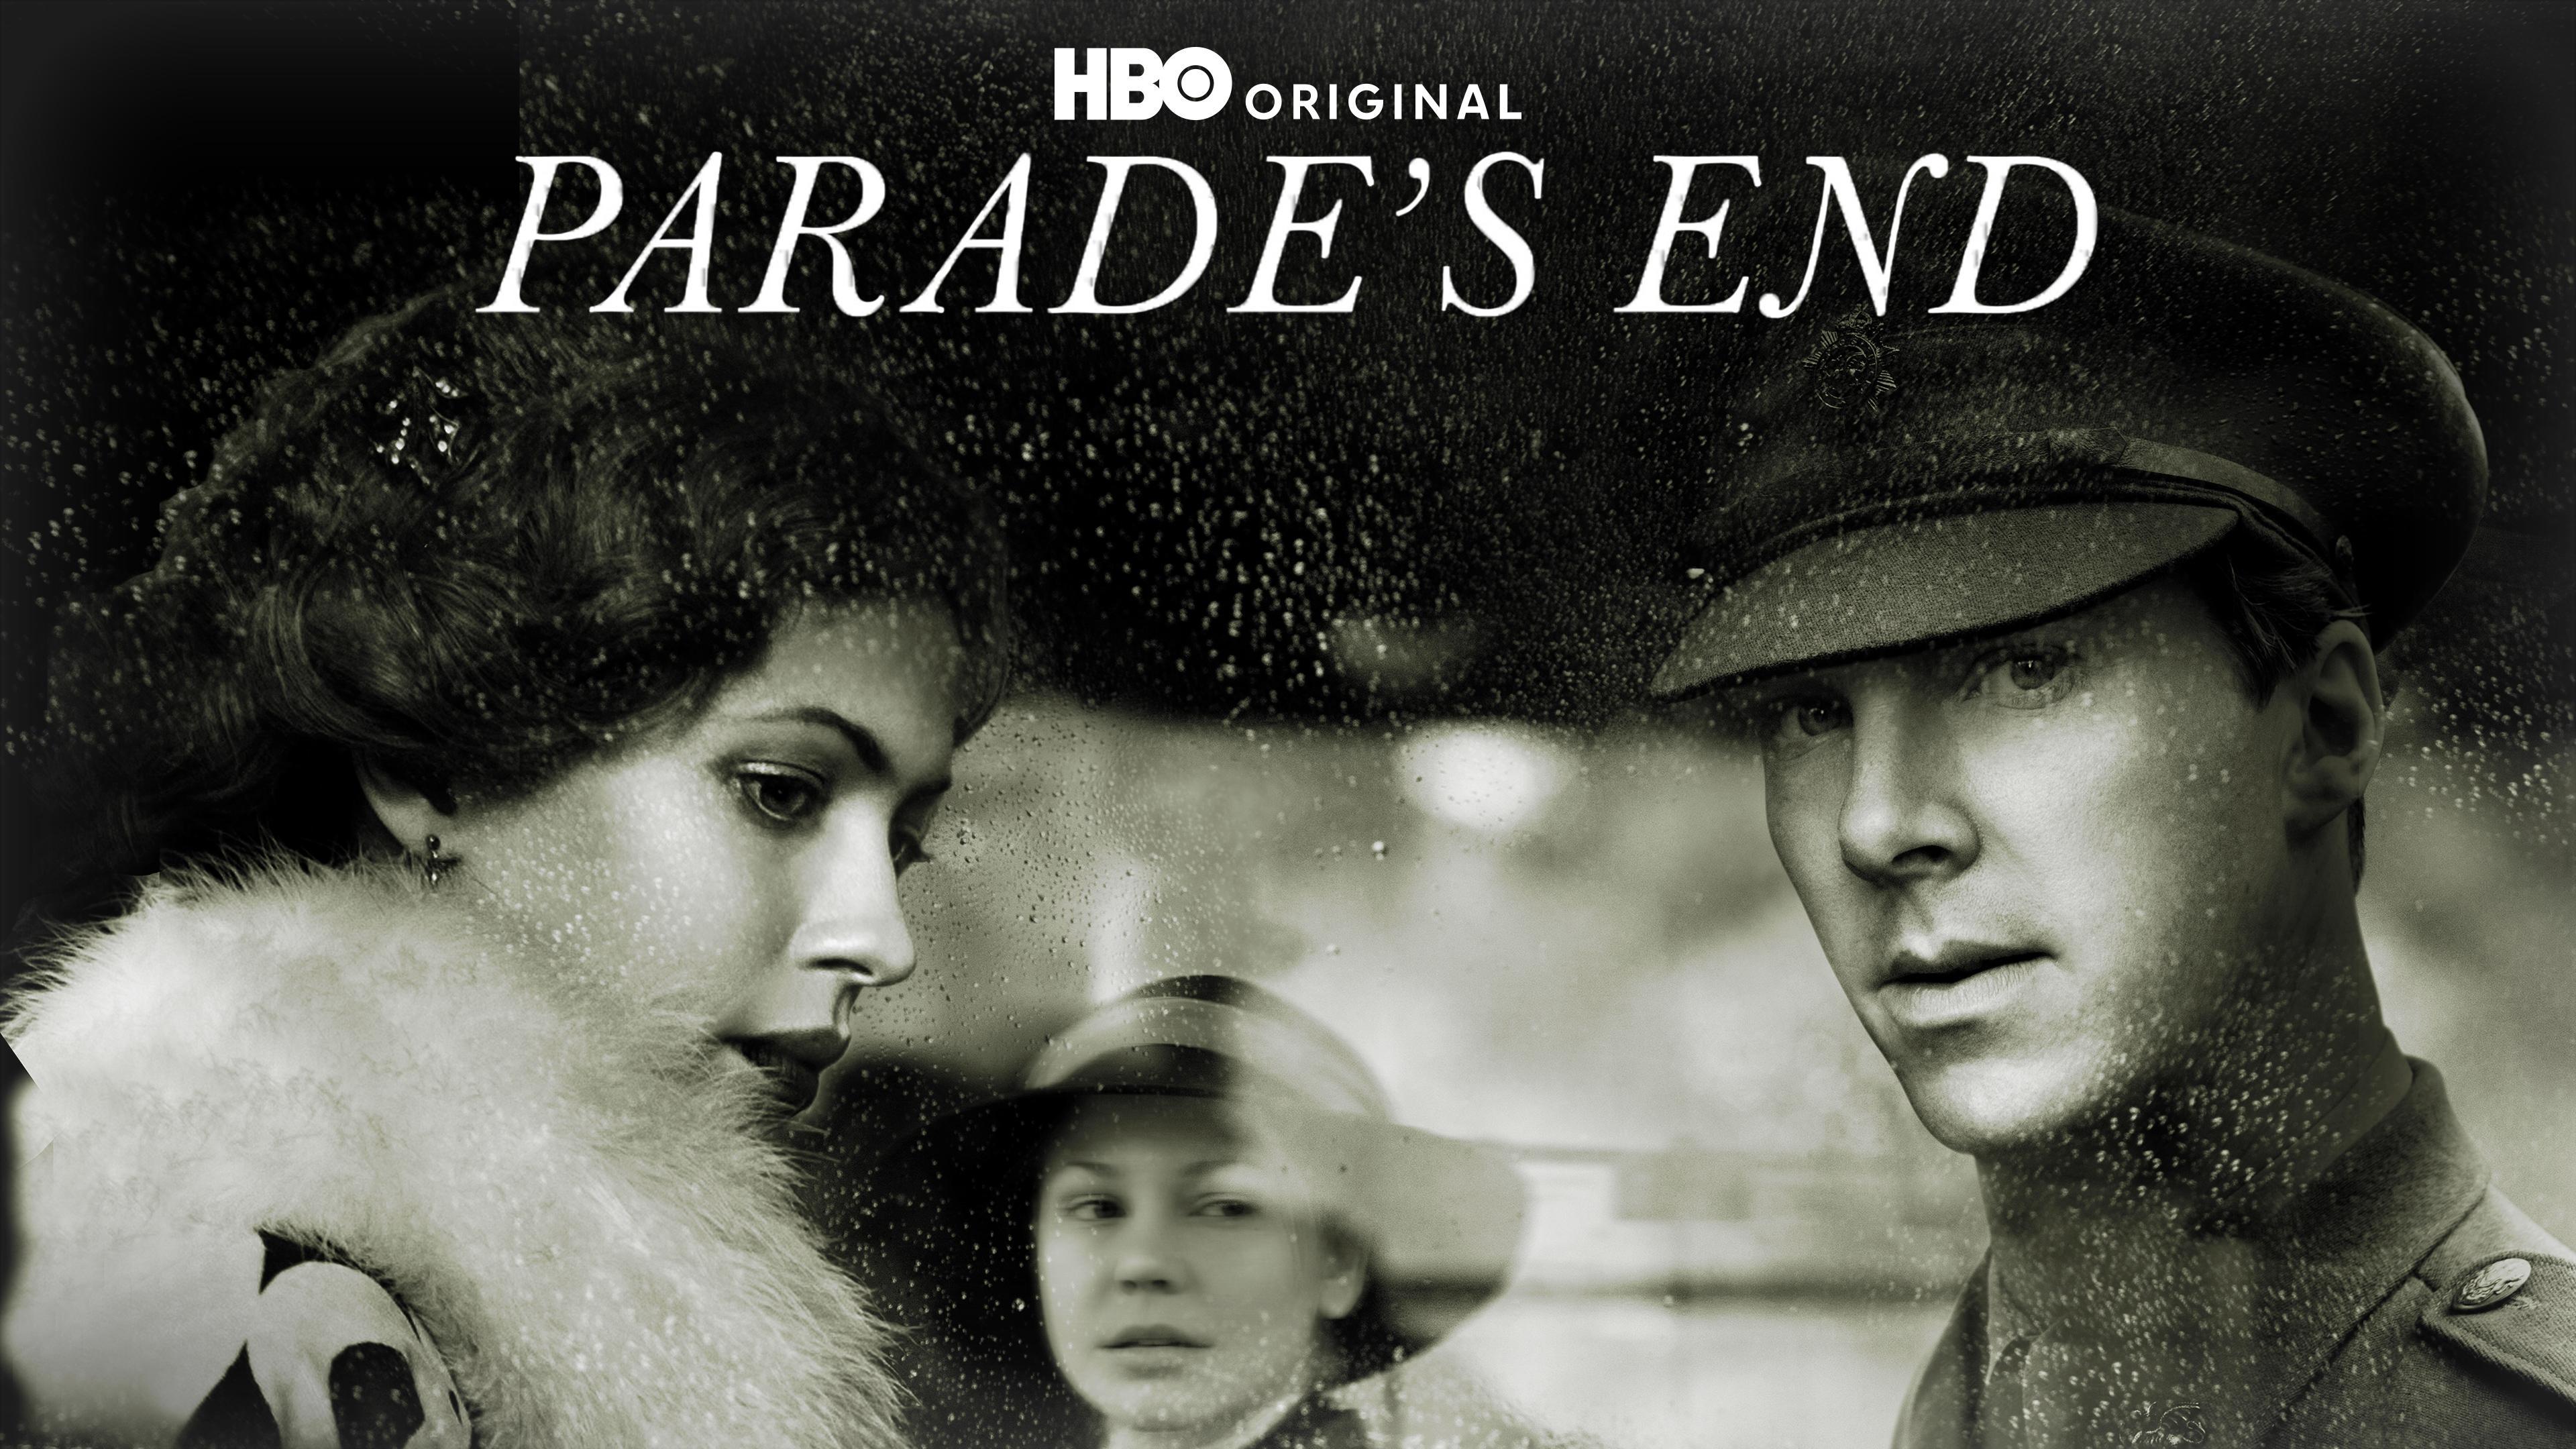 Parade's End | Official Website for the HBO Series | HBO.com